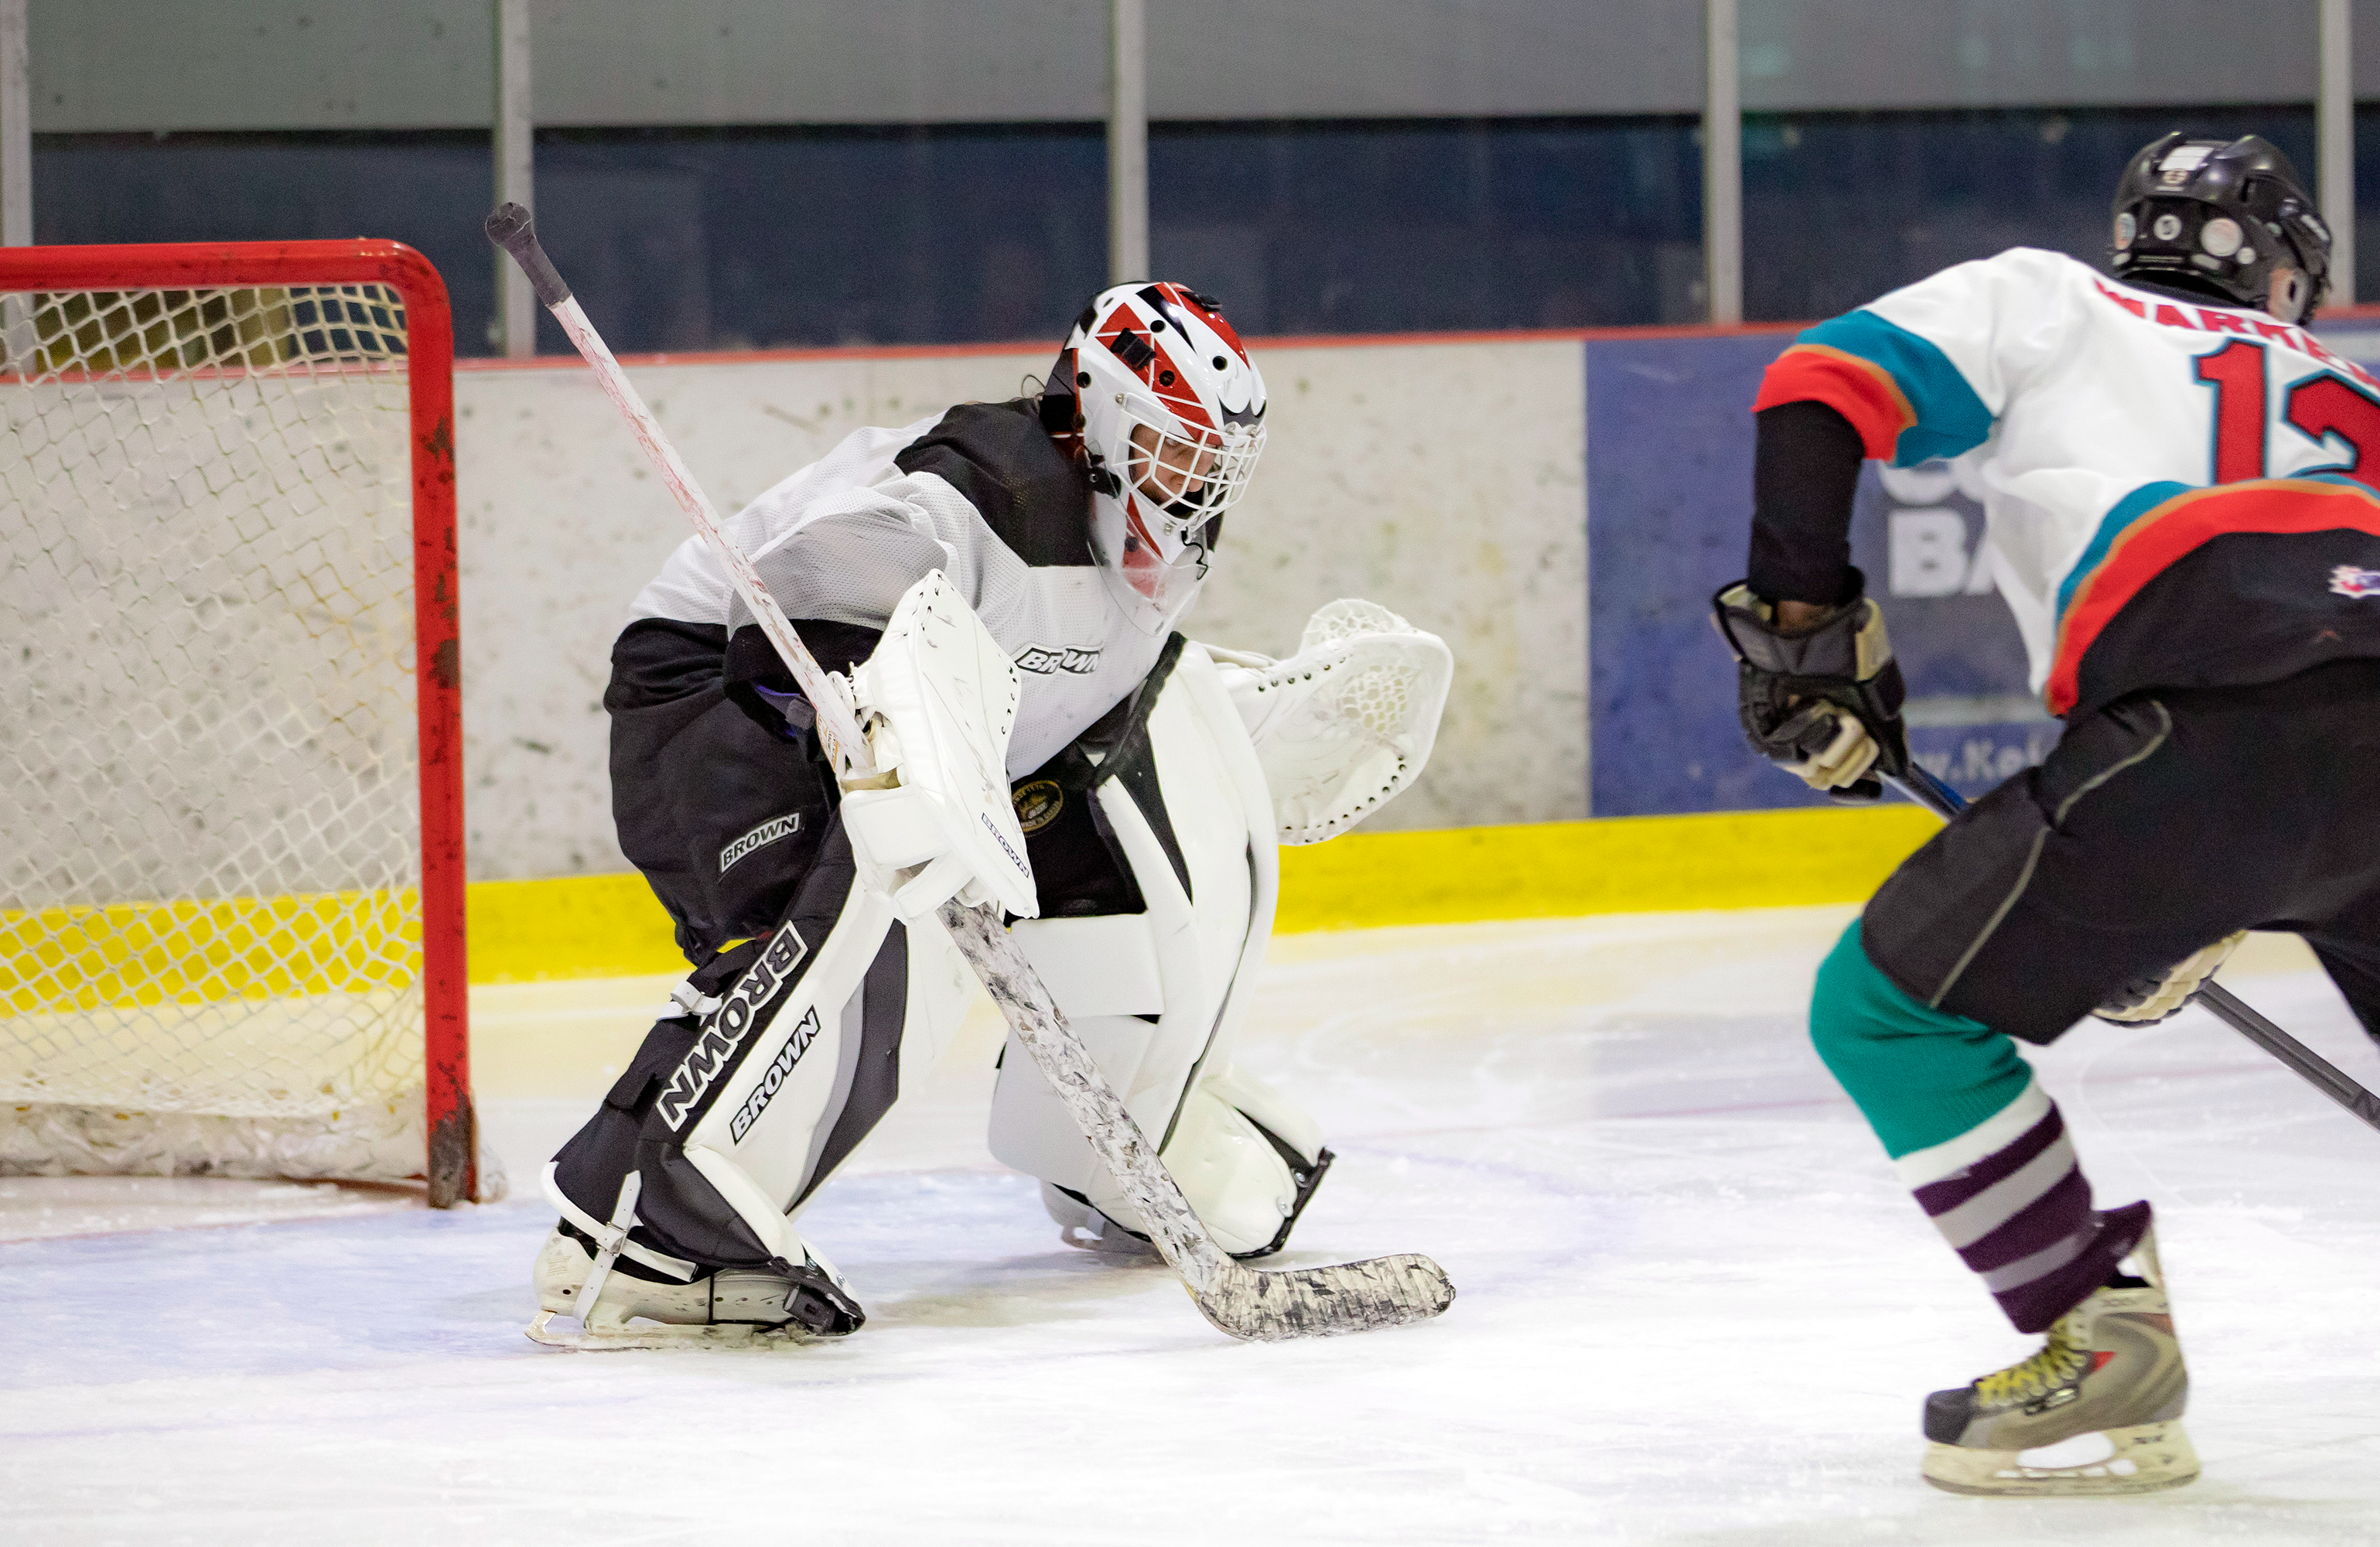 A goalie facing a player in close range shooting